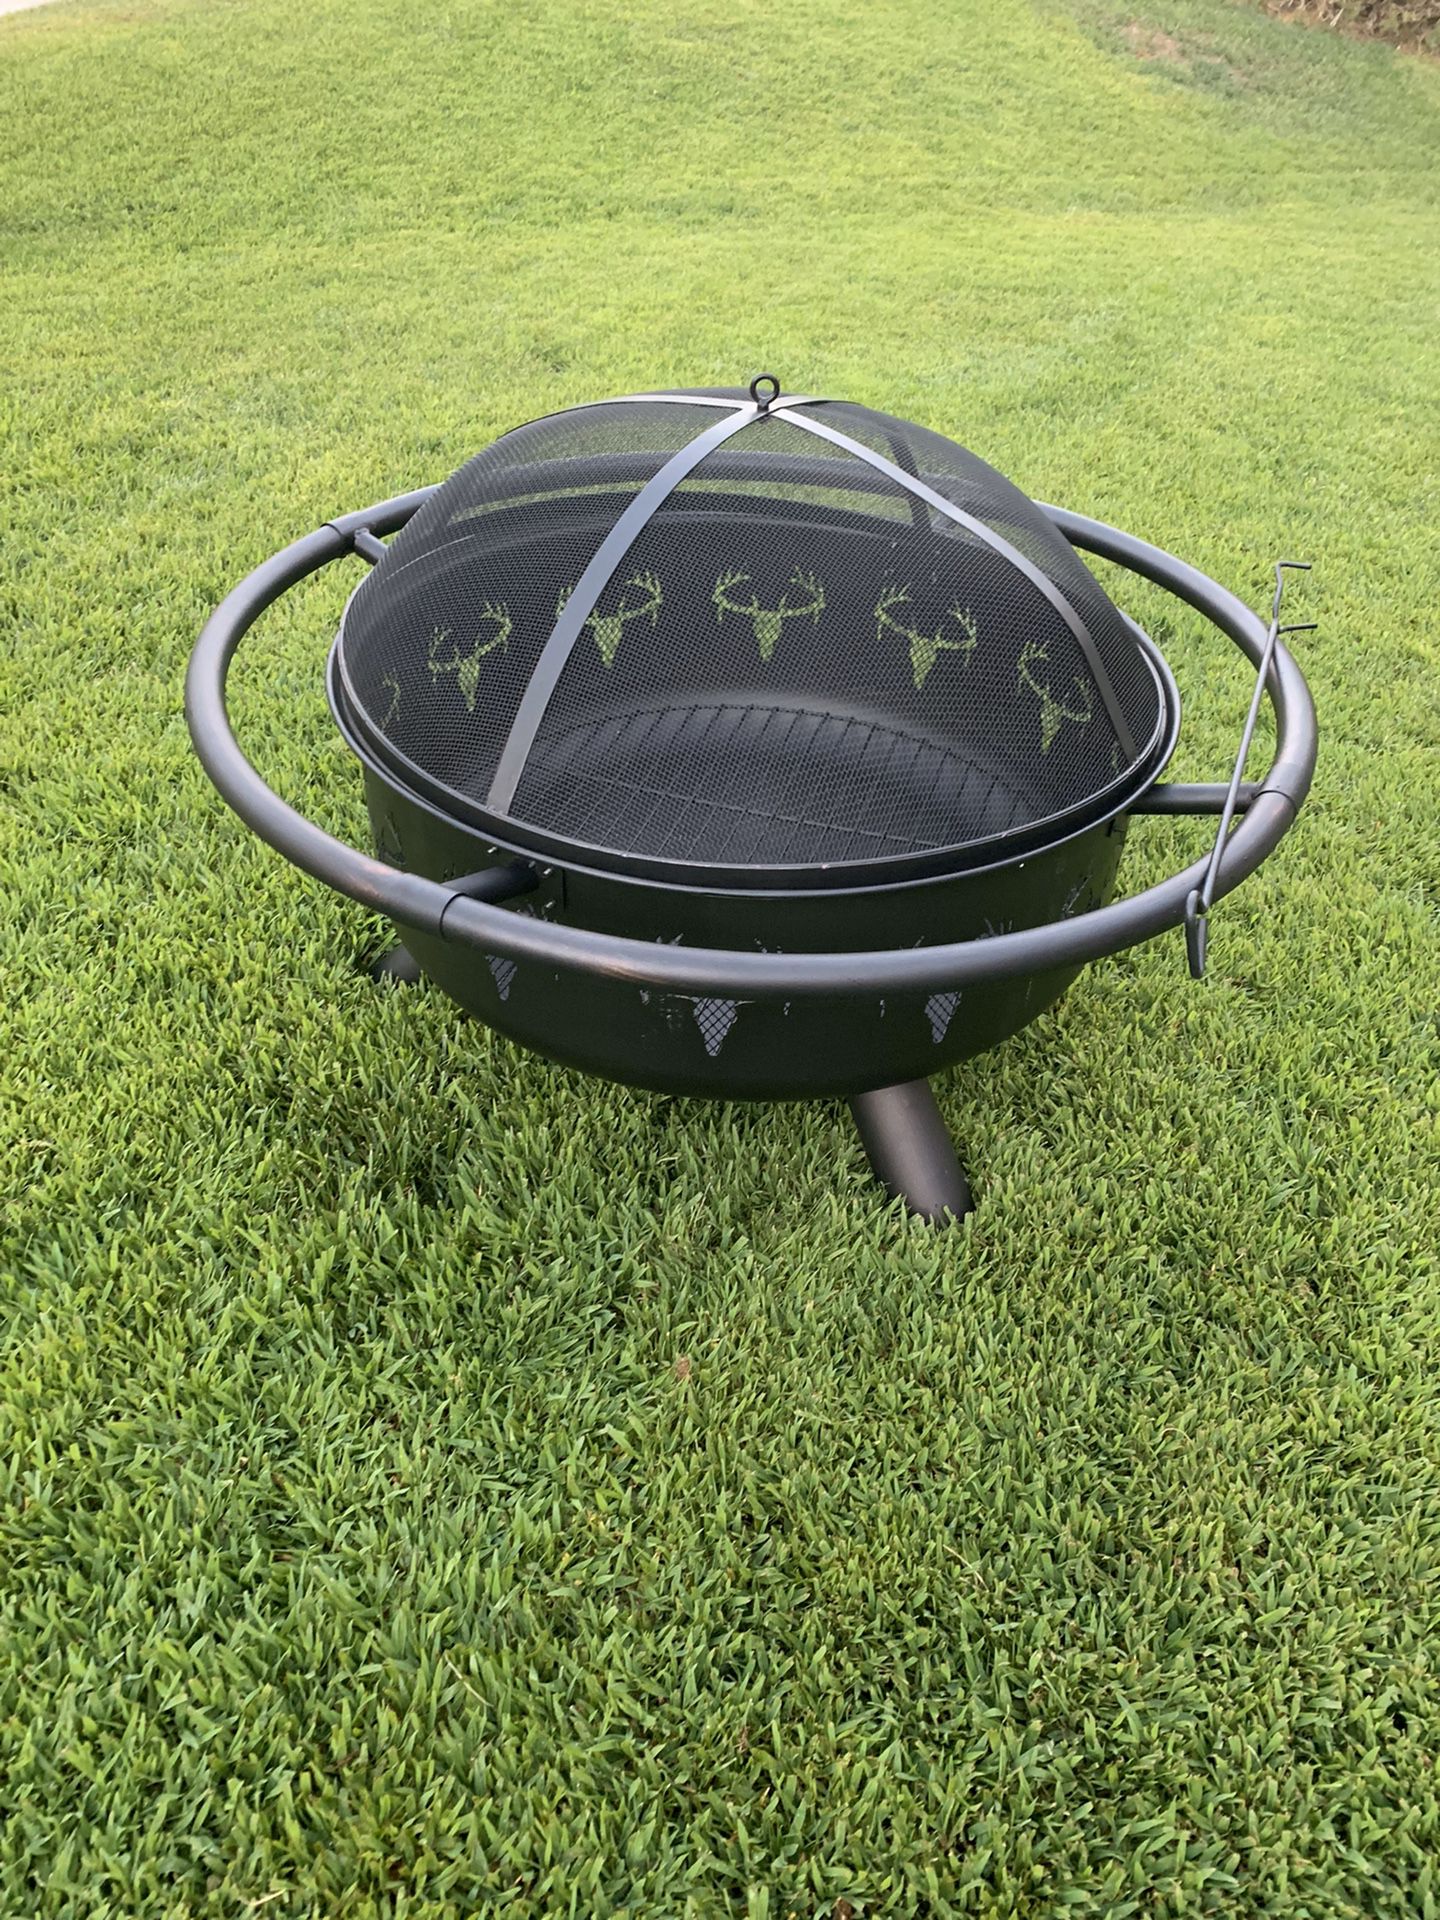 Fire pit big $60 PRICE IS FIRM BRAND NEW